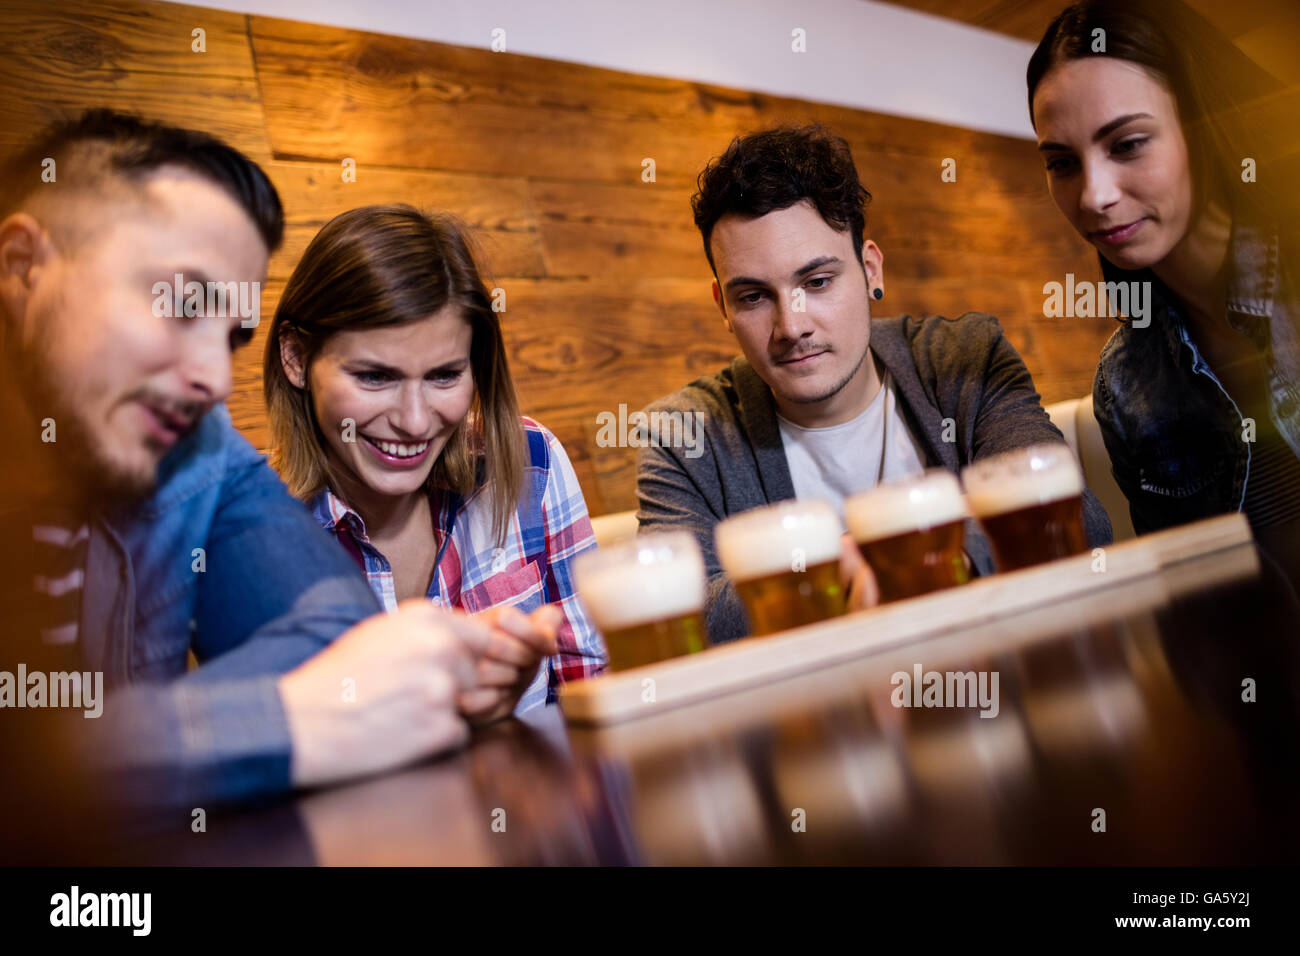 Friends looking at beer glasses in restaurant Stock Photo